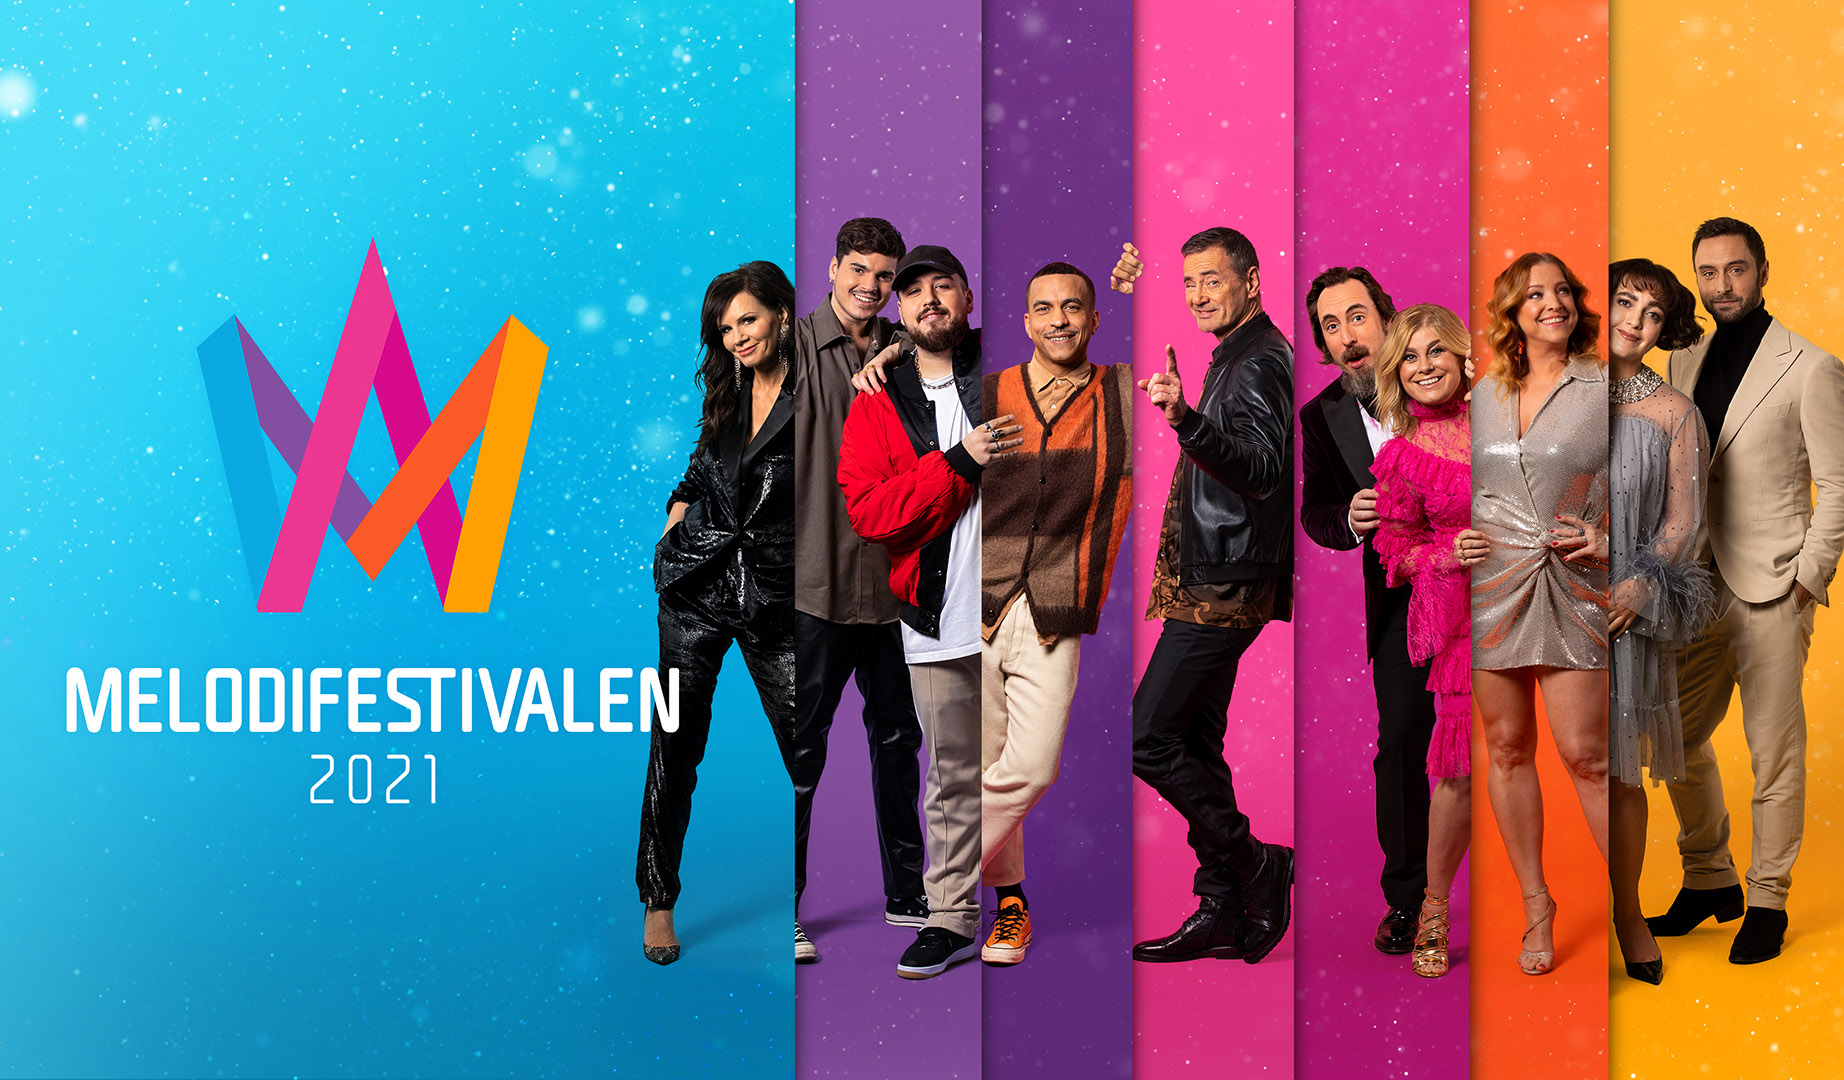 Sweden: The snippets of the second Melodifestivalen semi-final songs are out!